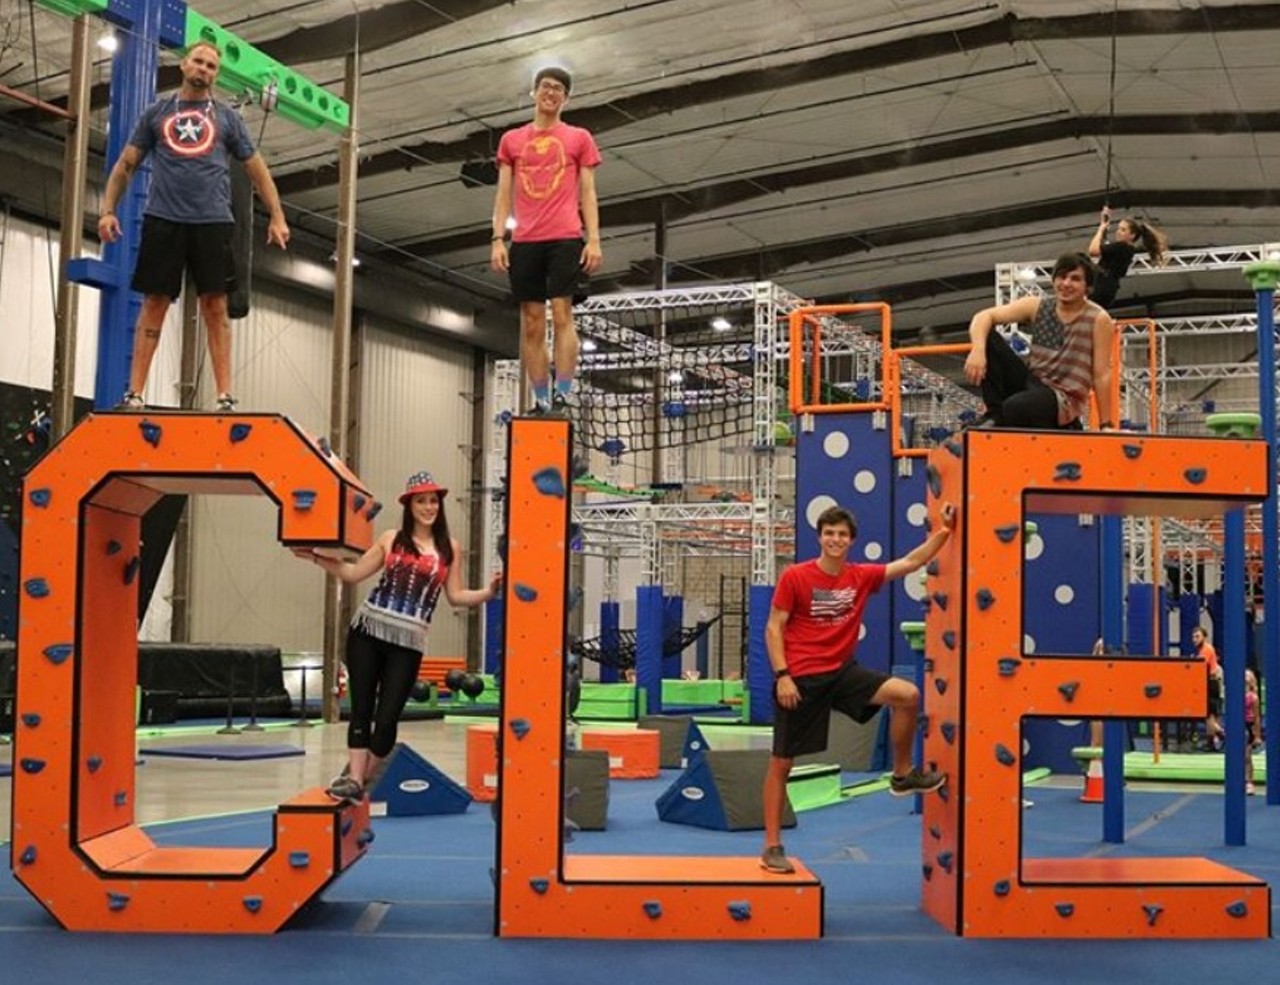 Play: CLE
38525 Chester Rd, Avon, 440-695-3565
Play: CLE is the perfect place to stay active while also staying cool. There&#146;s ziplining, rock climbing, a ropes course, a ninja warrior course and more.
Photo via playcle/Instagram